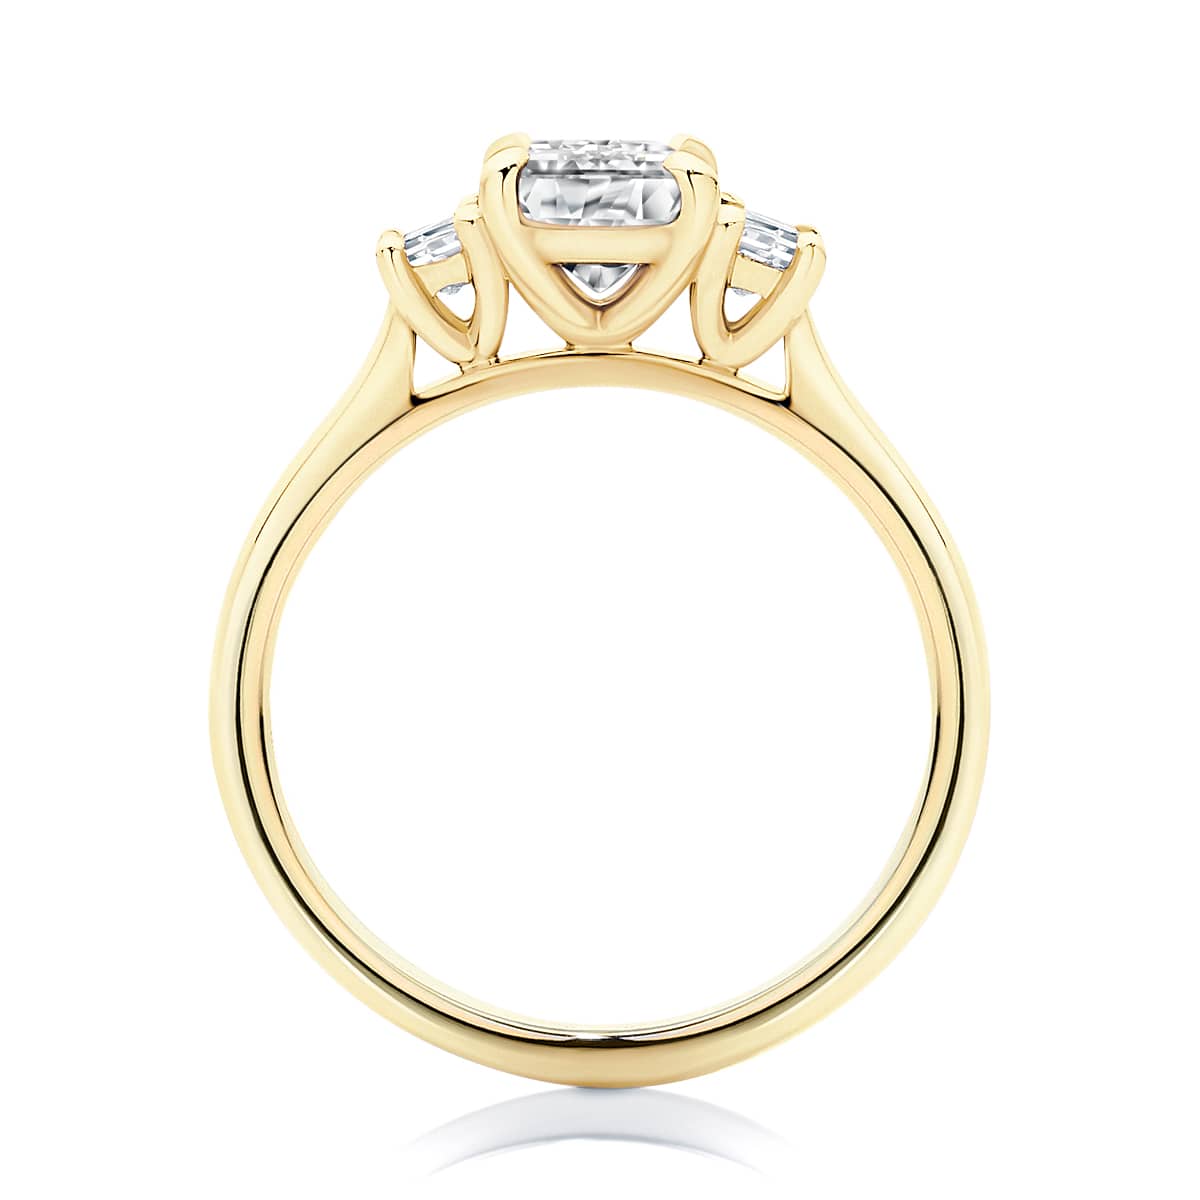 Soiree Emerald Cut Diamond Engagement Ring with Trapezoids